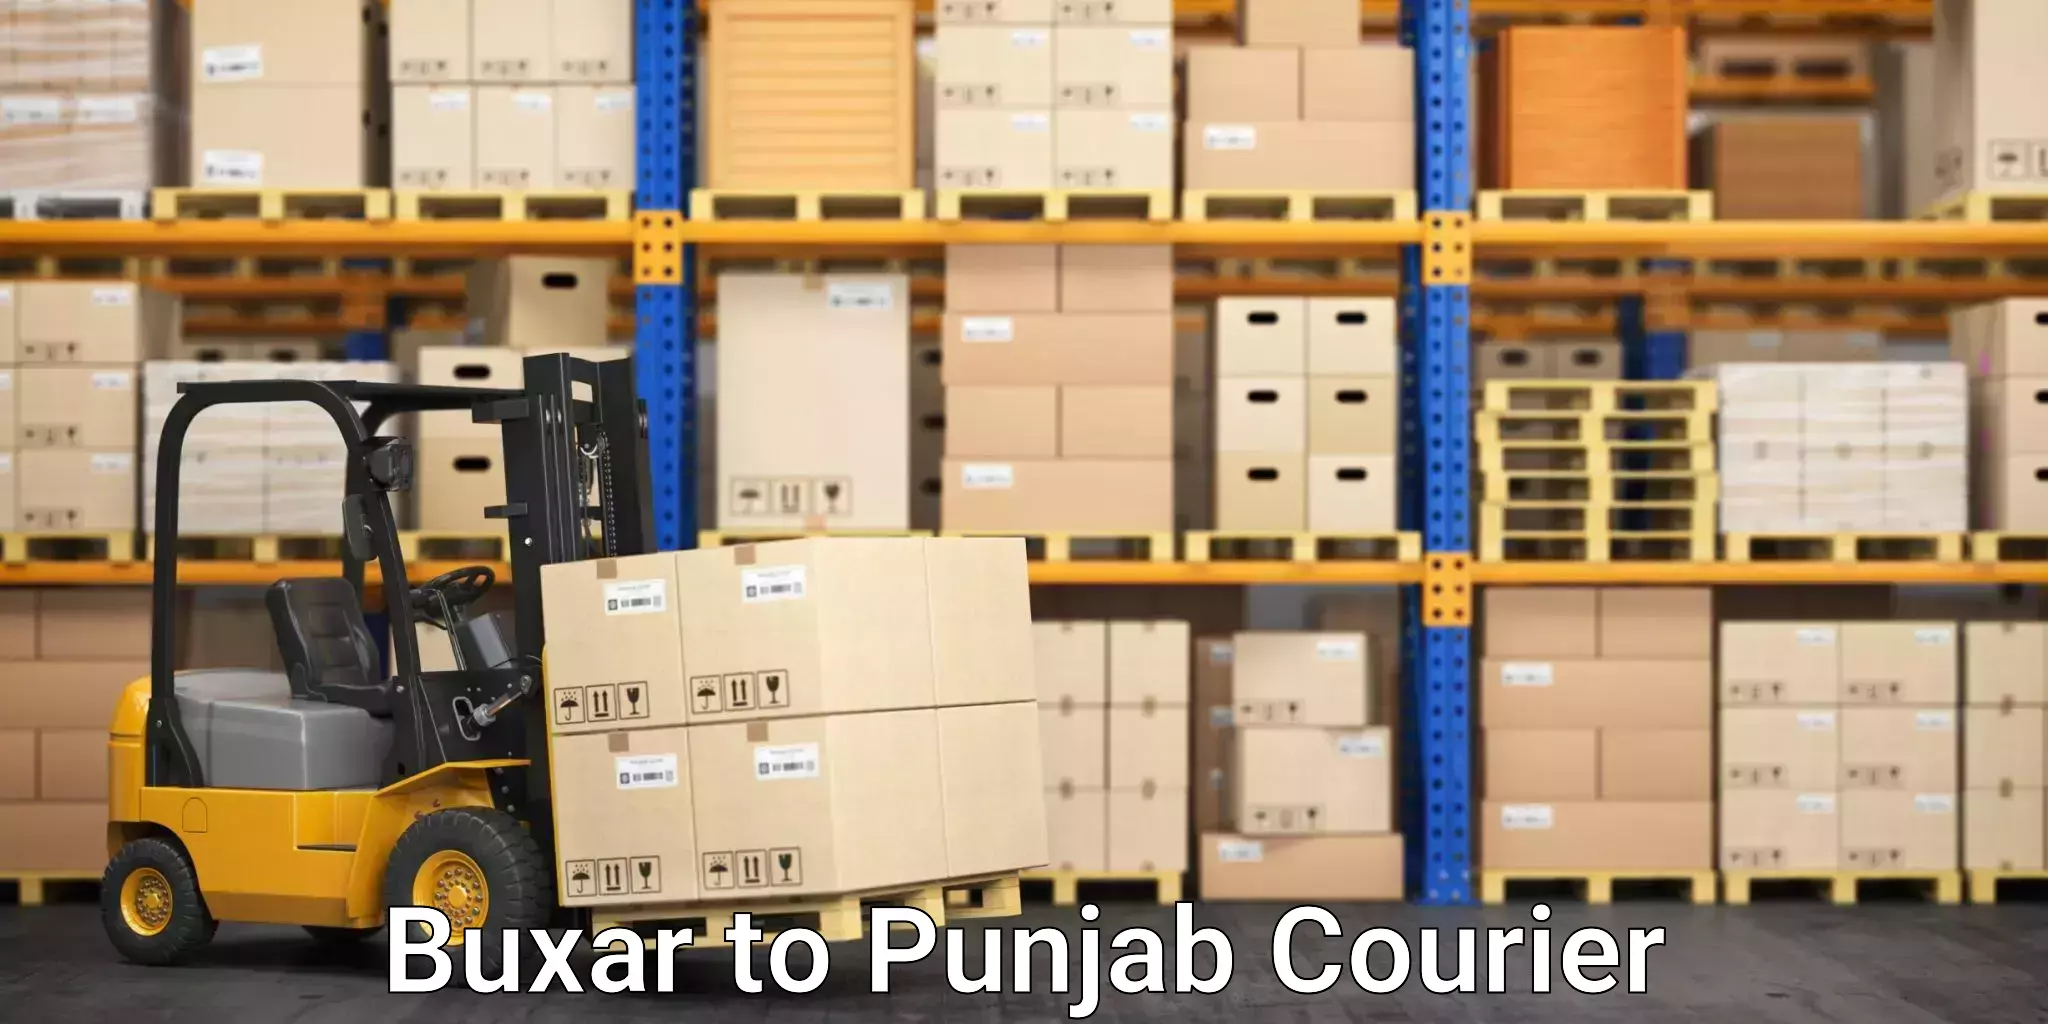 Furniture transport professionals Buxar to Malout